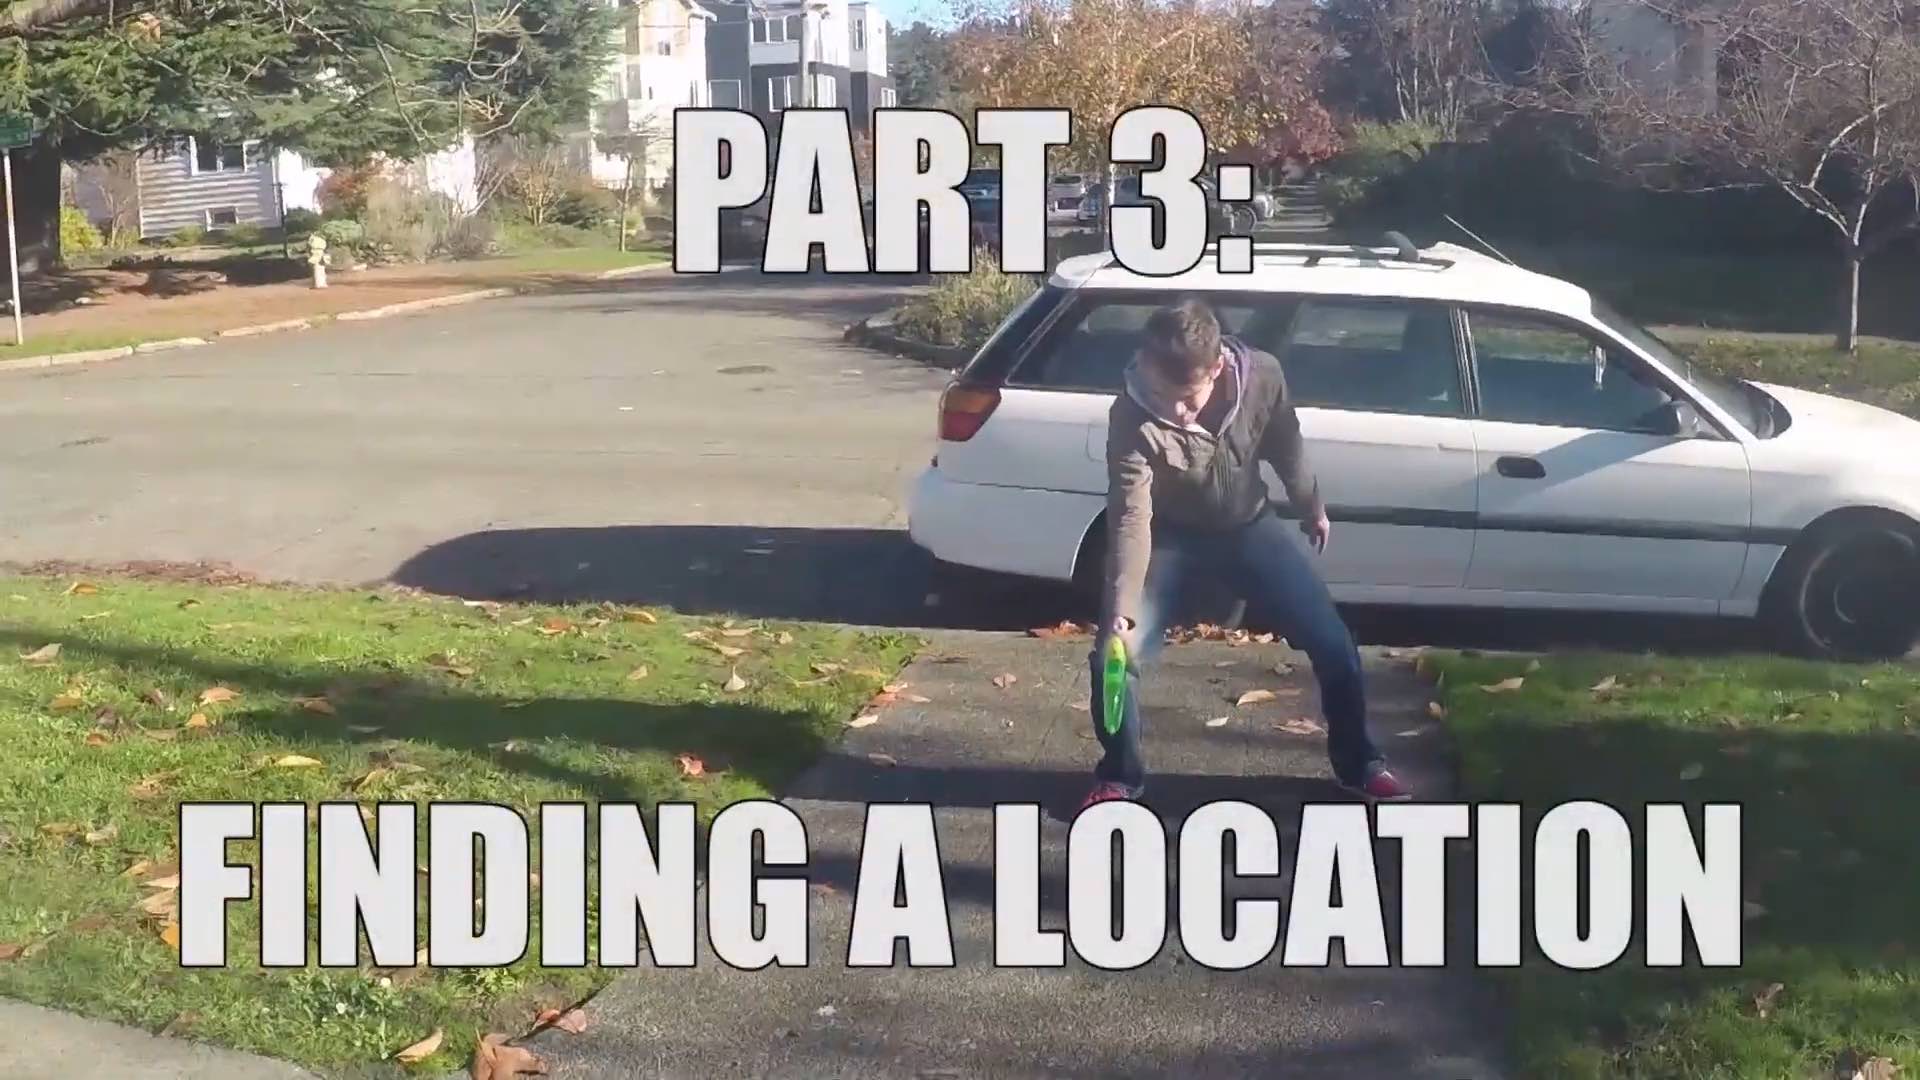 Load video: Video 3 of 4: Finding a Location